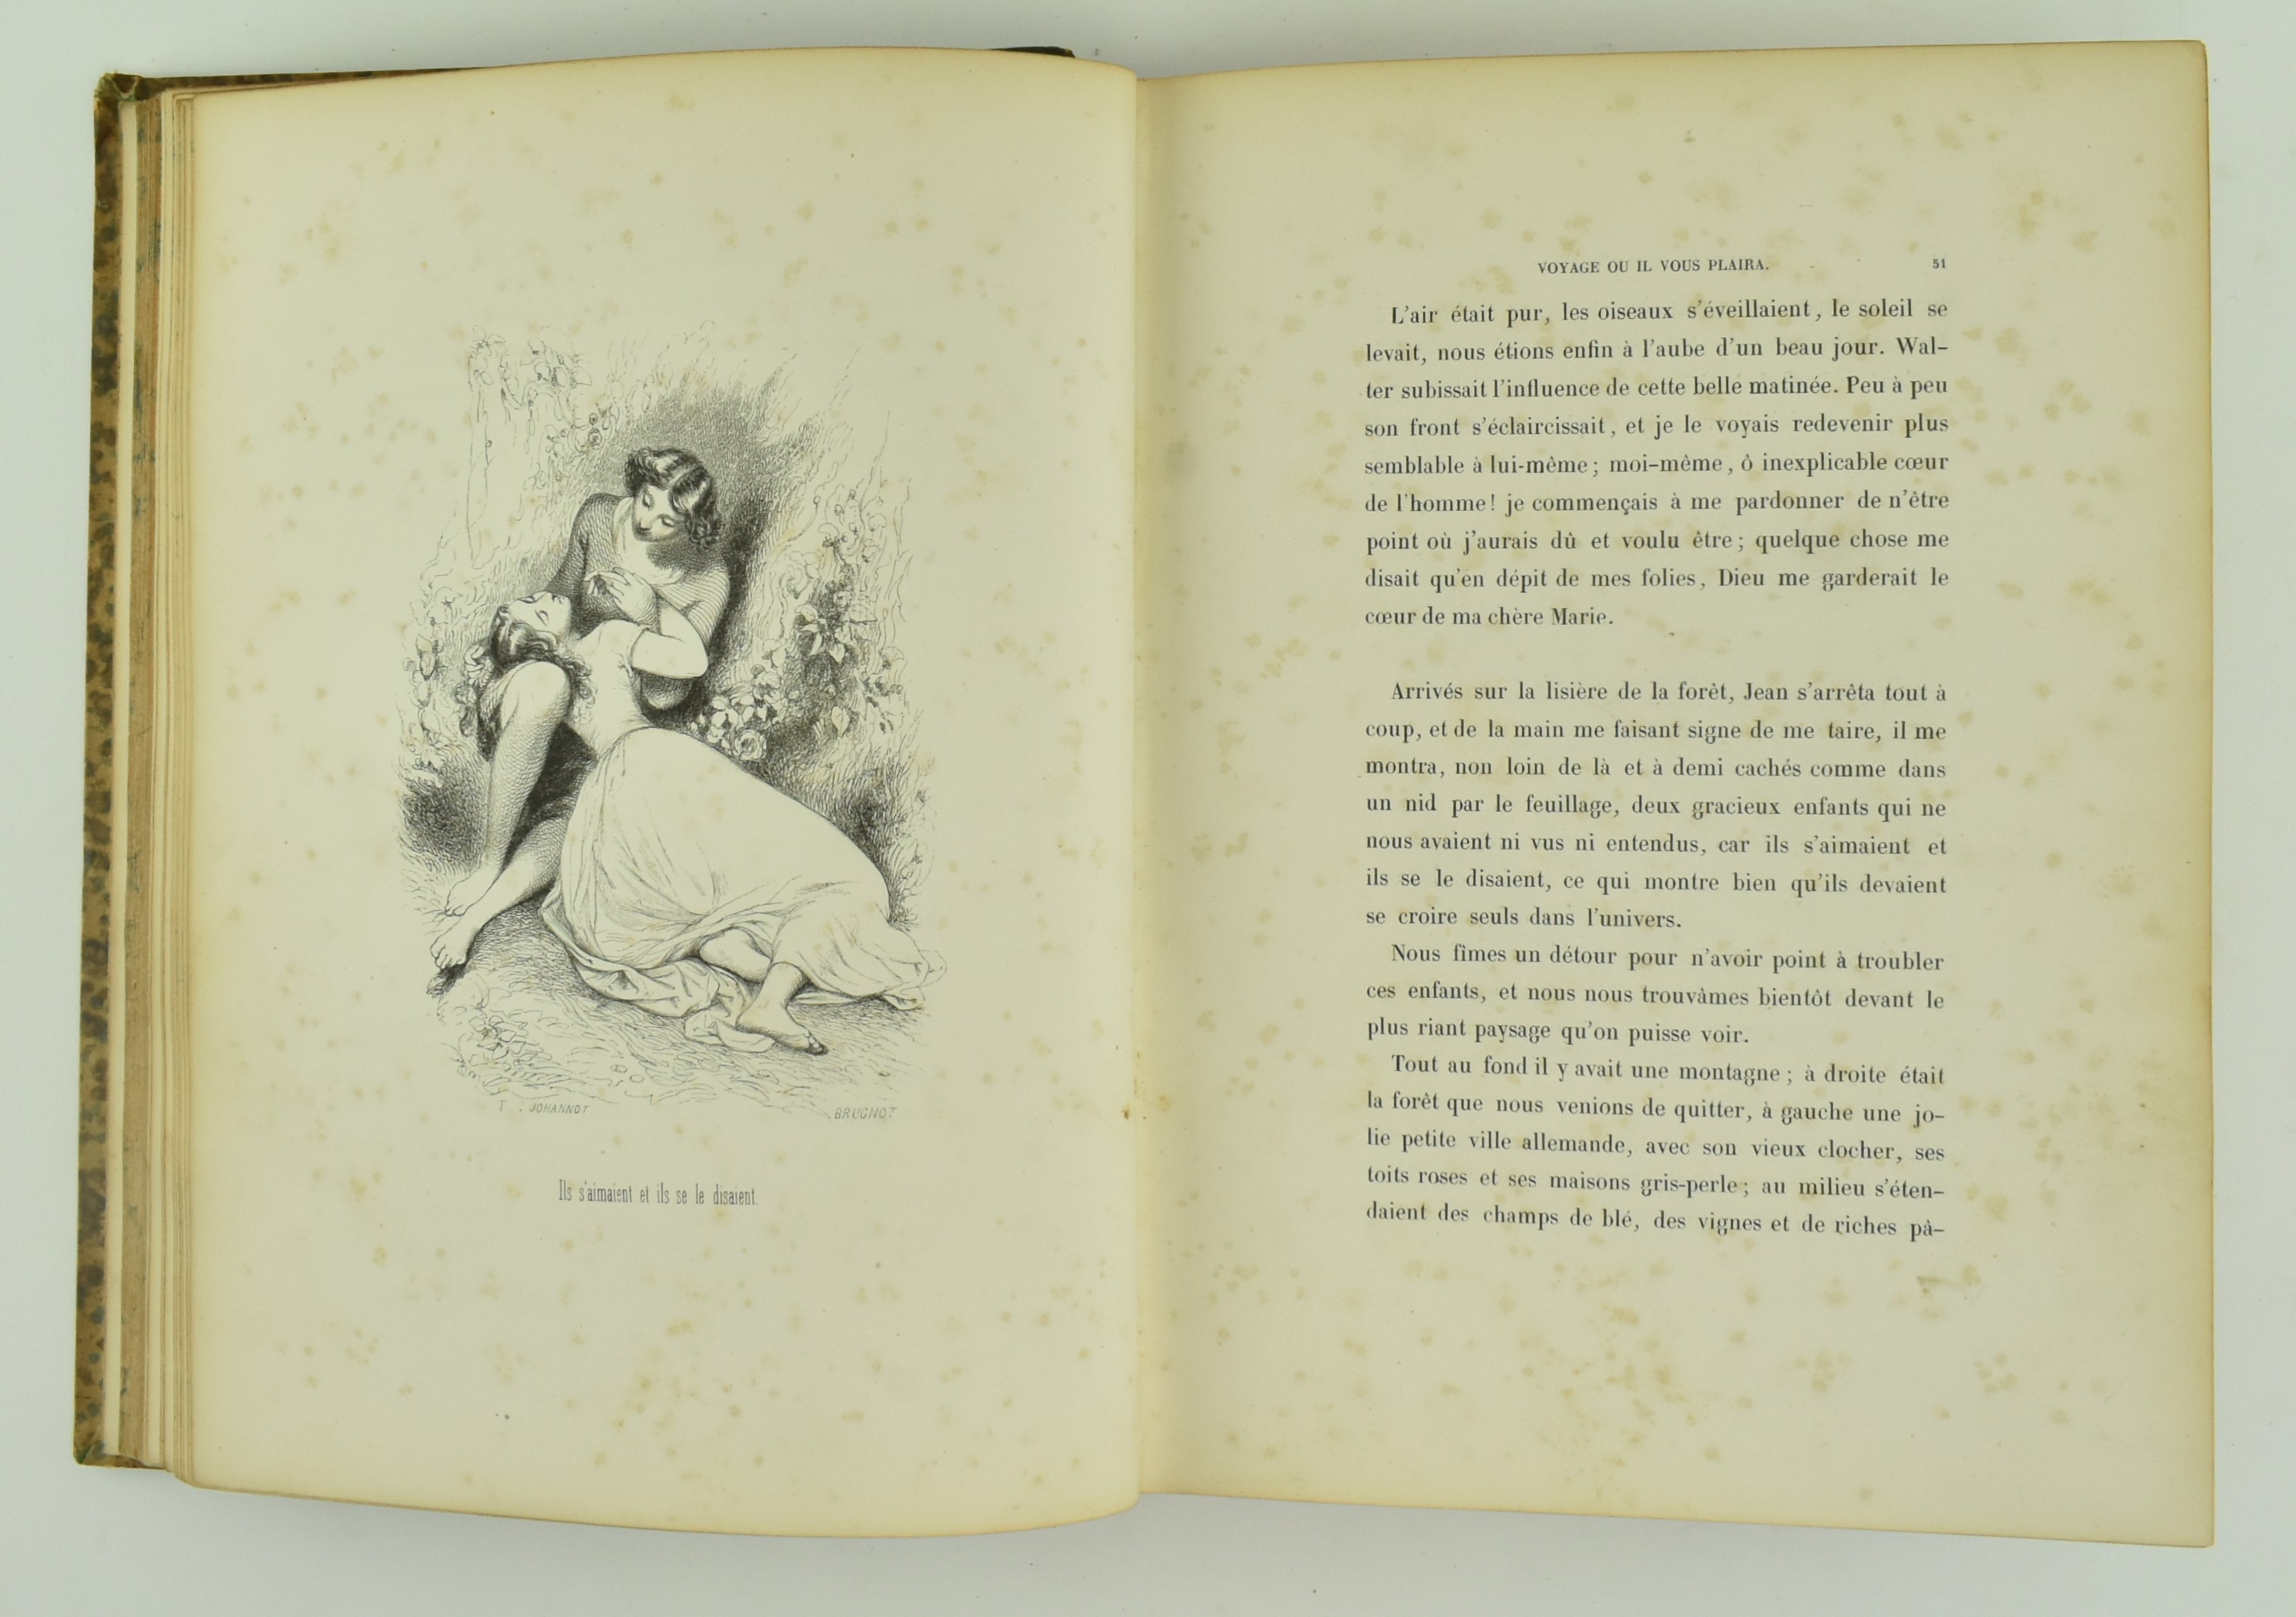 JOHANNOT, TONY. 1843 VOYAGE OU IL VOUS PLAIRA FIRST EDITION - Image 4 of 6